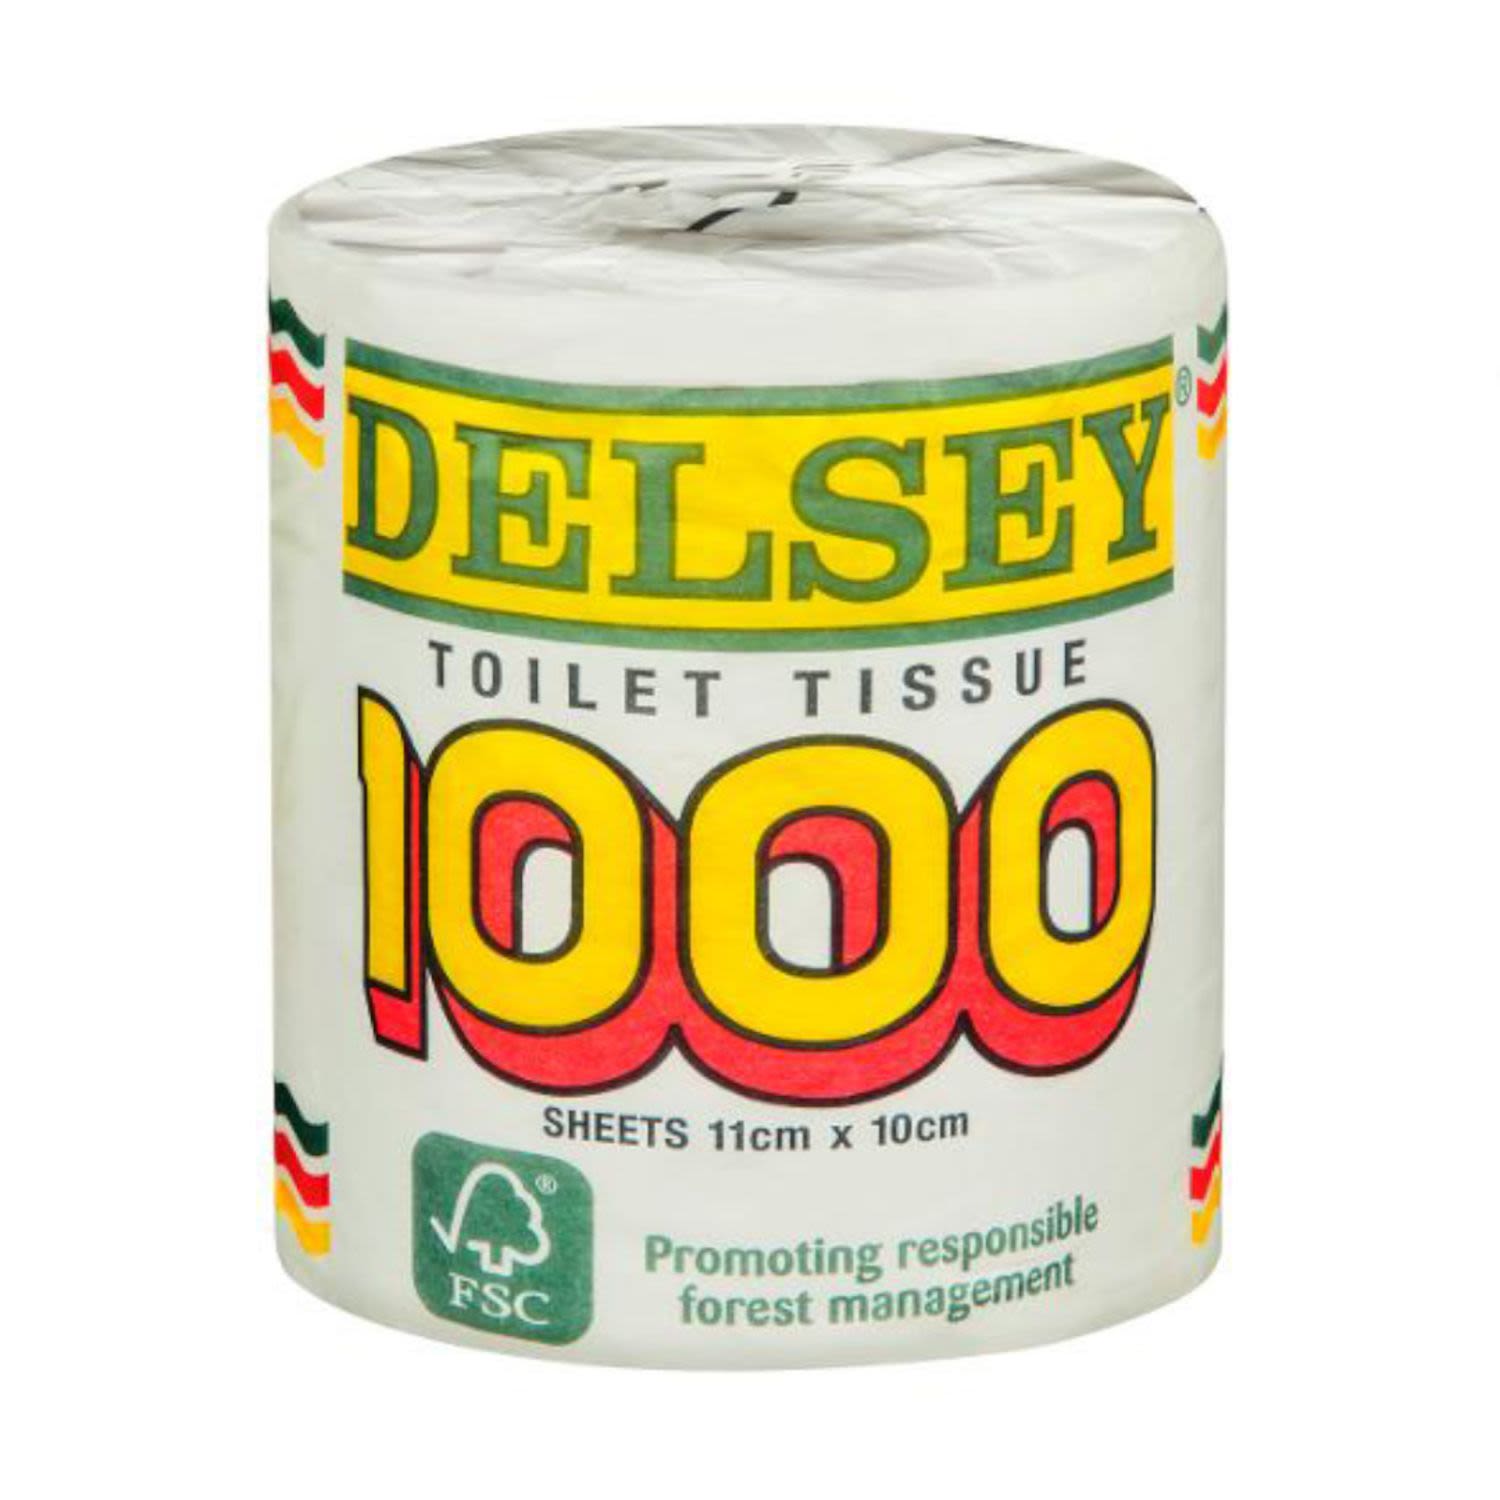 Delsey Toilet Tissue 1000 Sheets, 1 Each